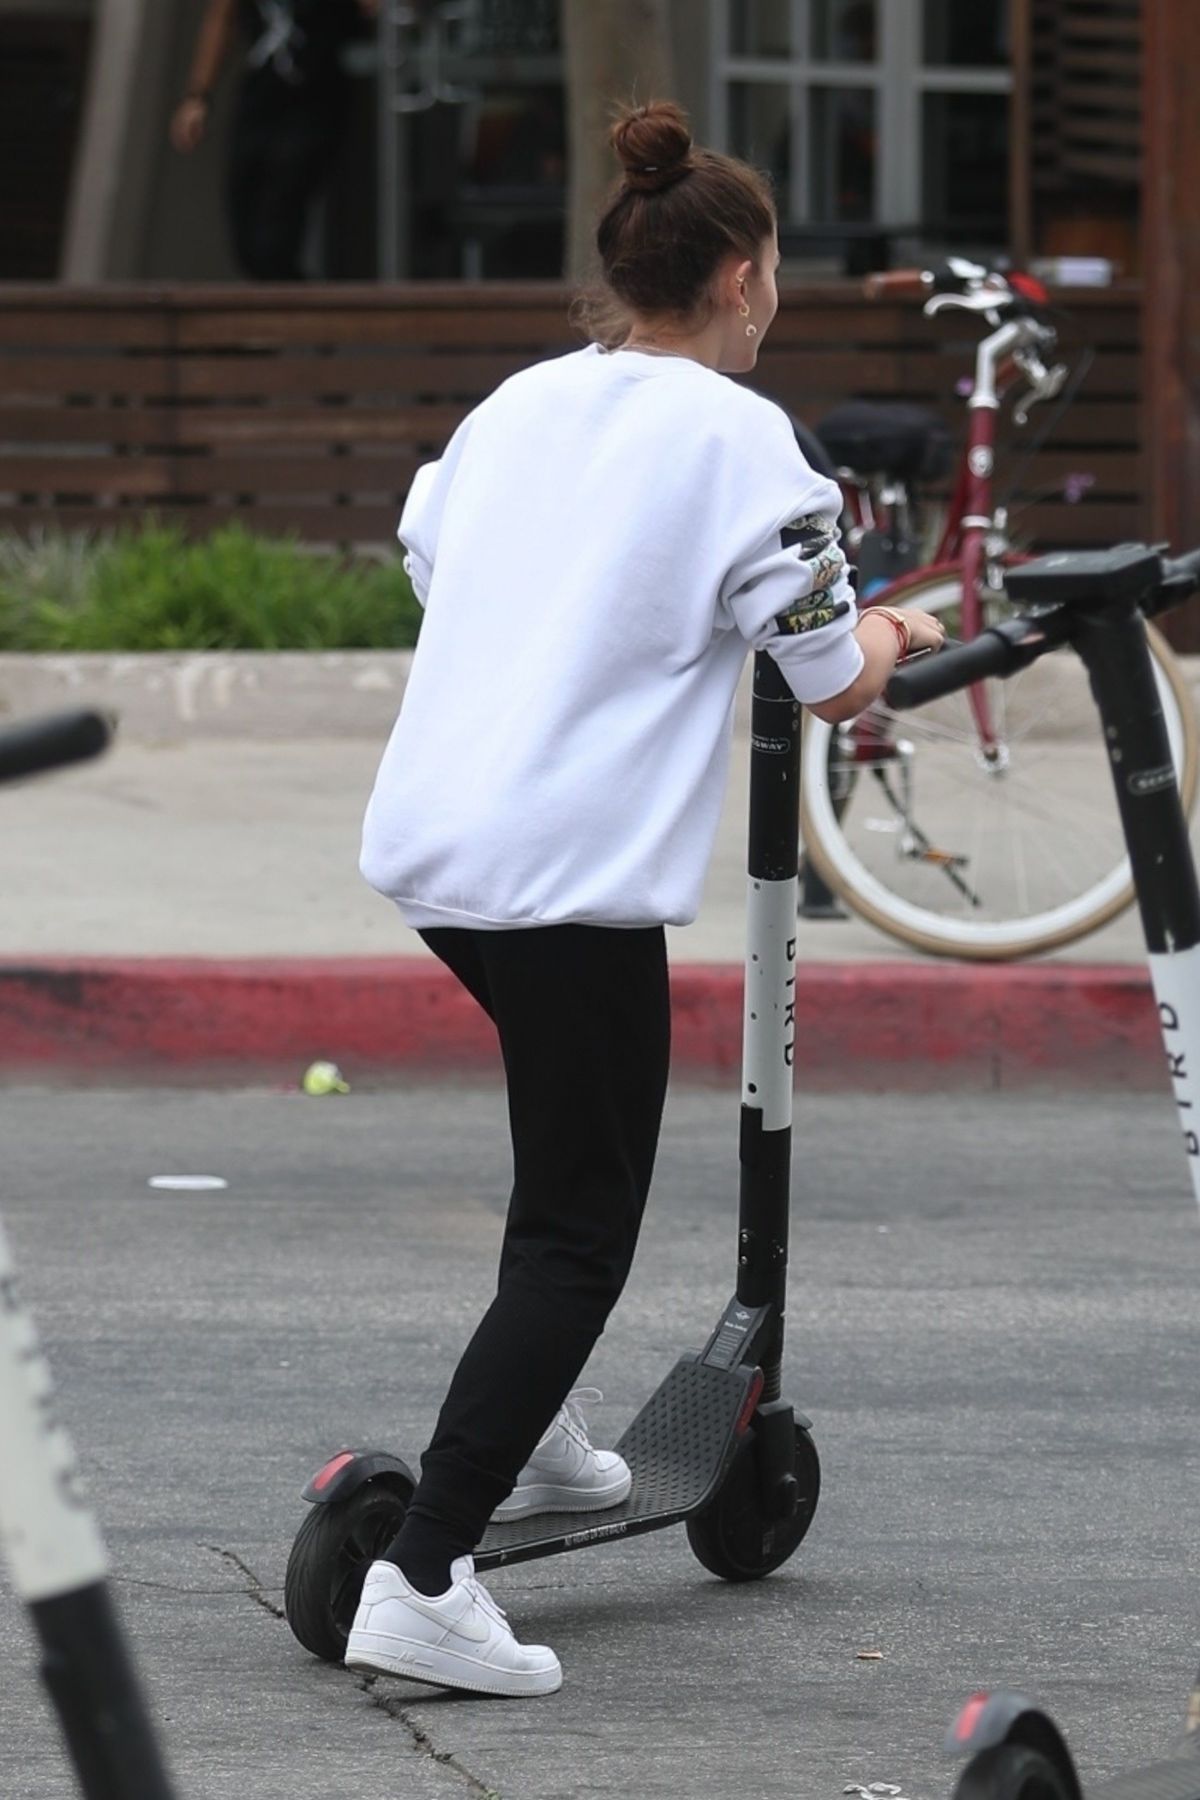 thylane-blondeau-and-samuel-bensoussan-riding-bird-scooters-in-west-hollywood-04-27-2019-8.jpg